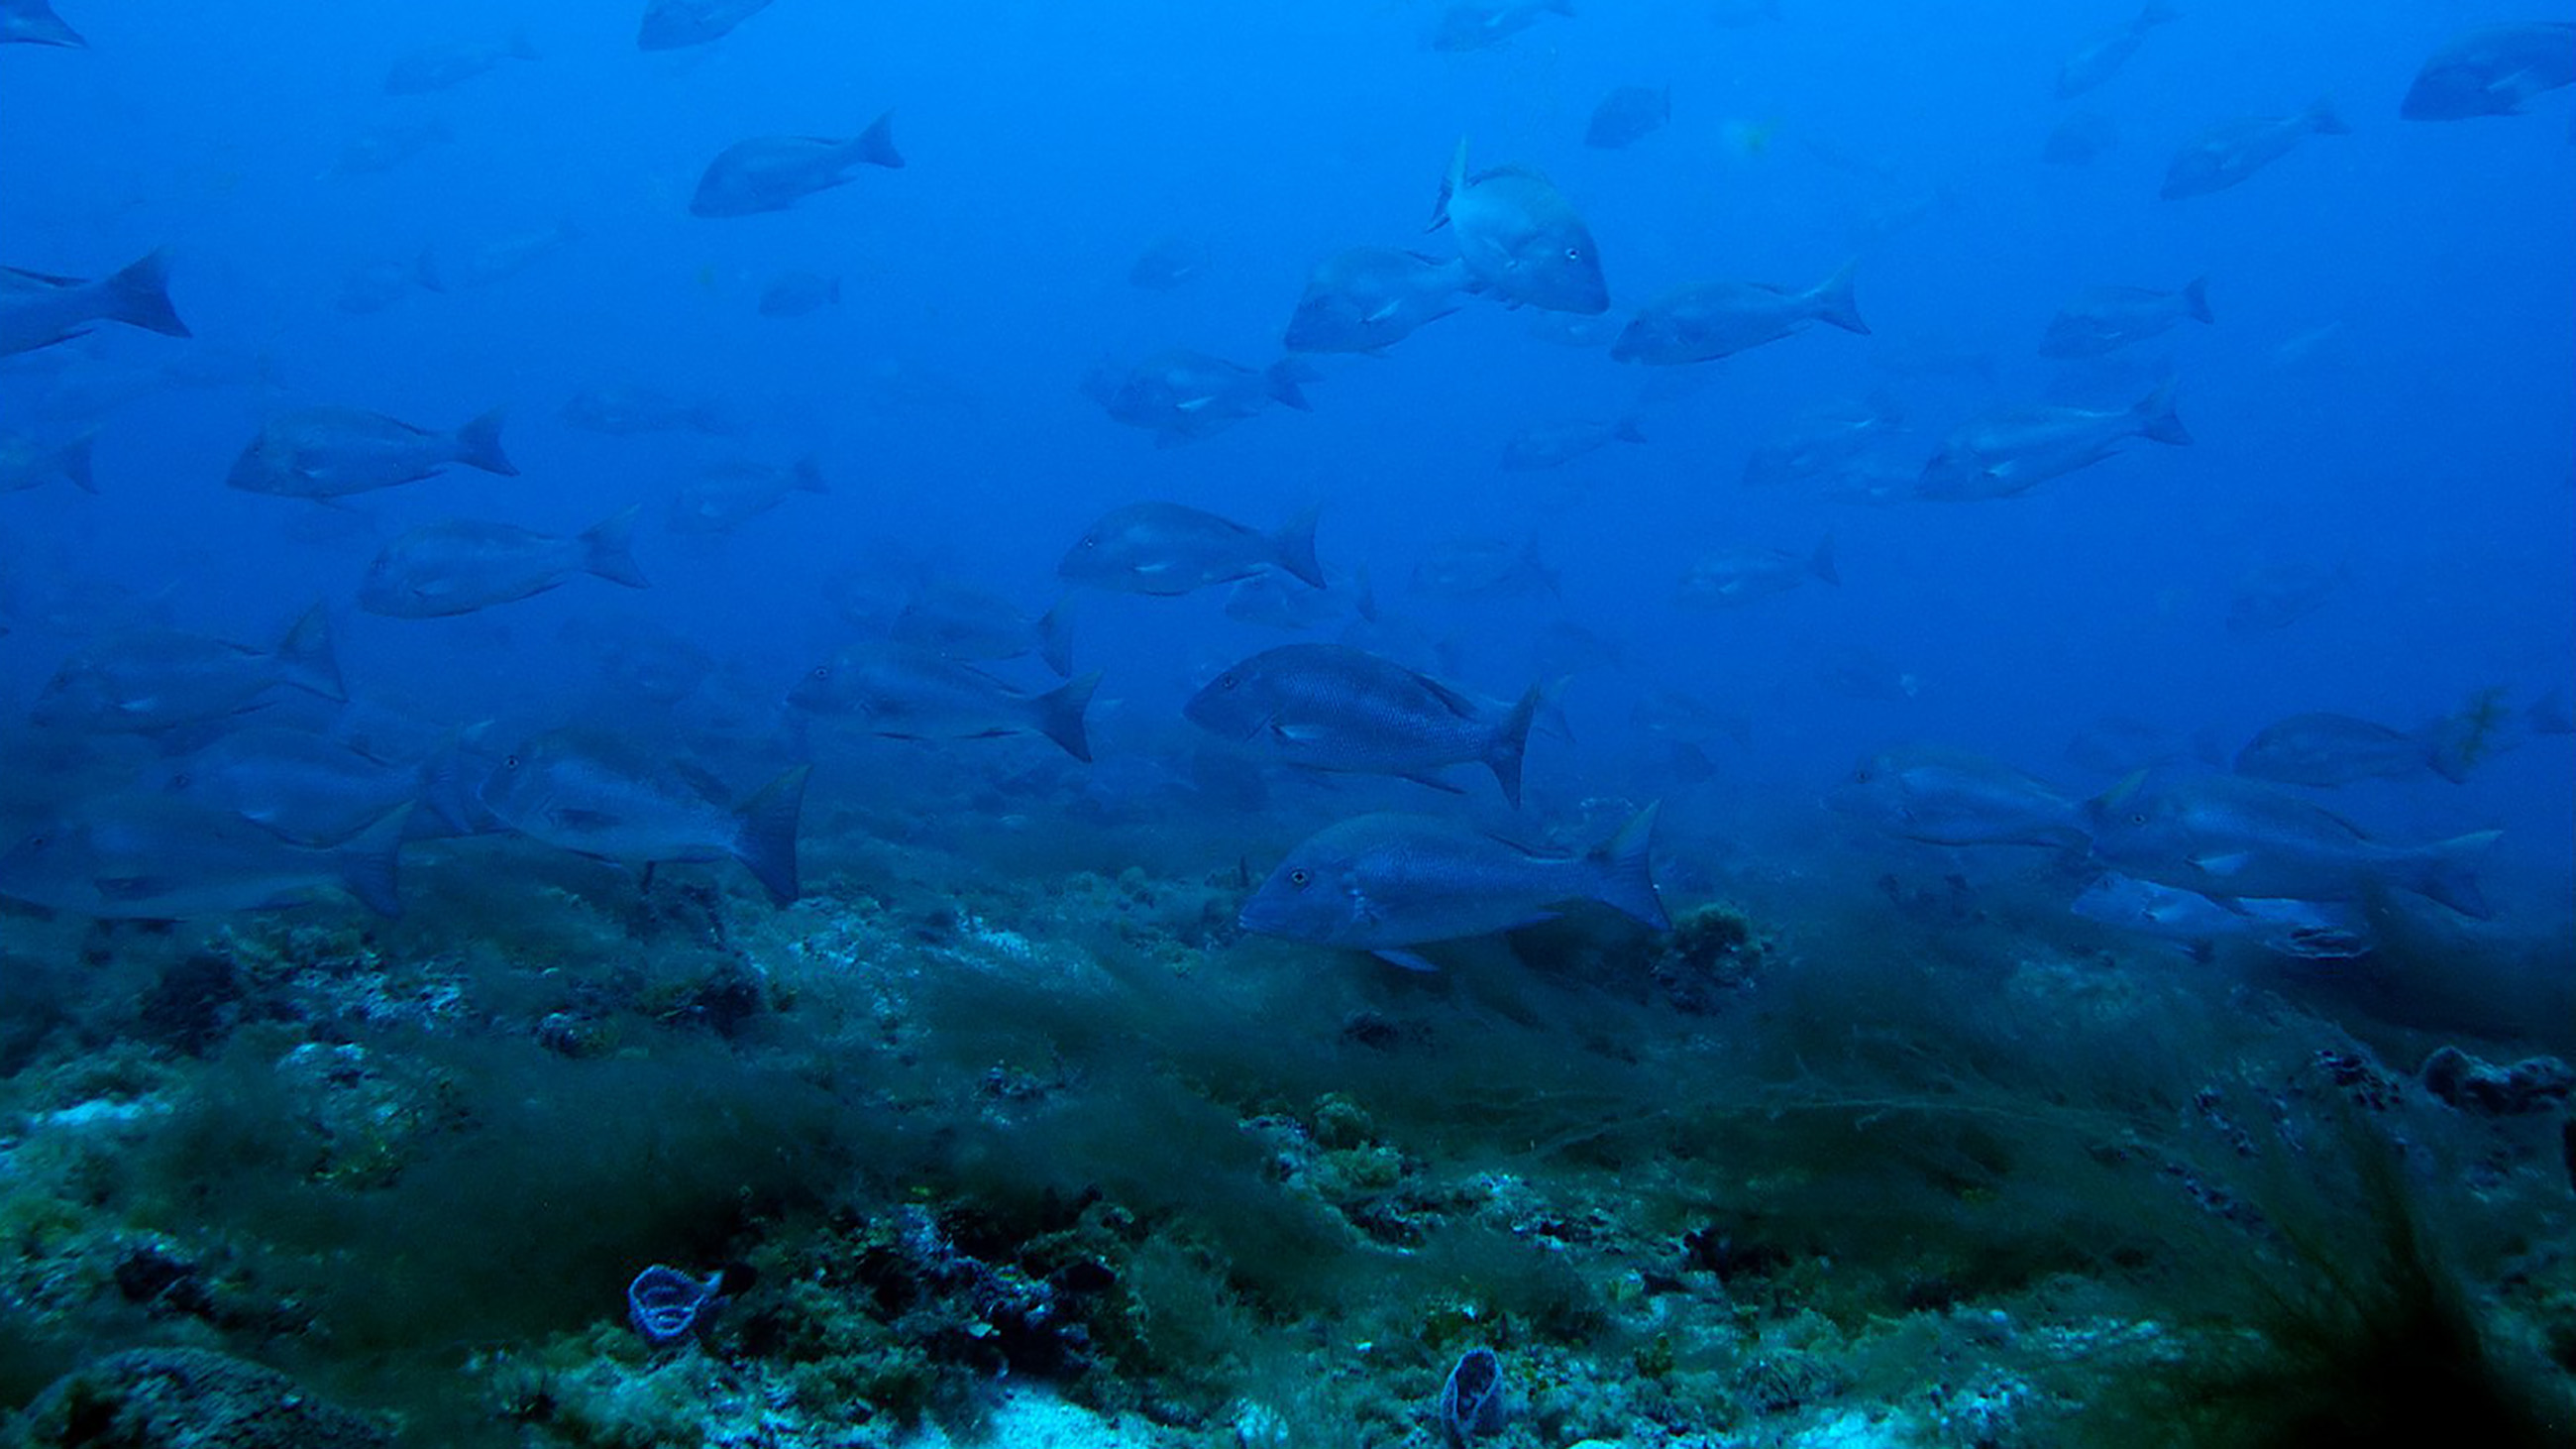 Mutton Snapper are spawning again at Riley's Hump in Tortugas South Ecological Reserve.